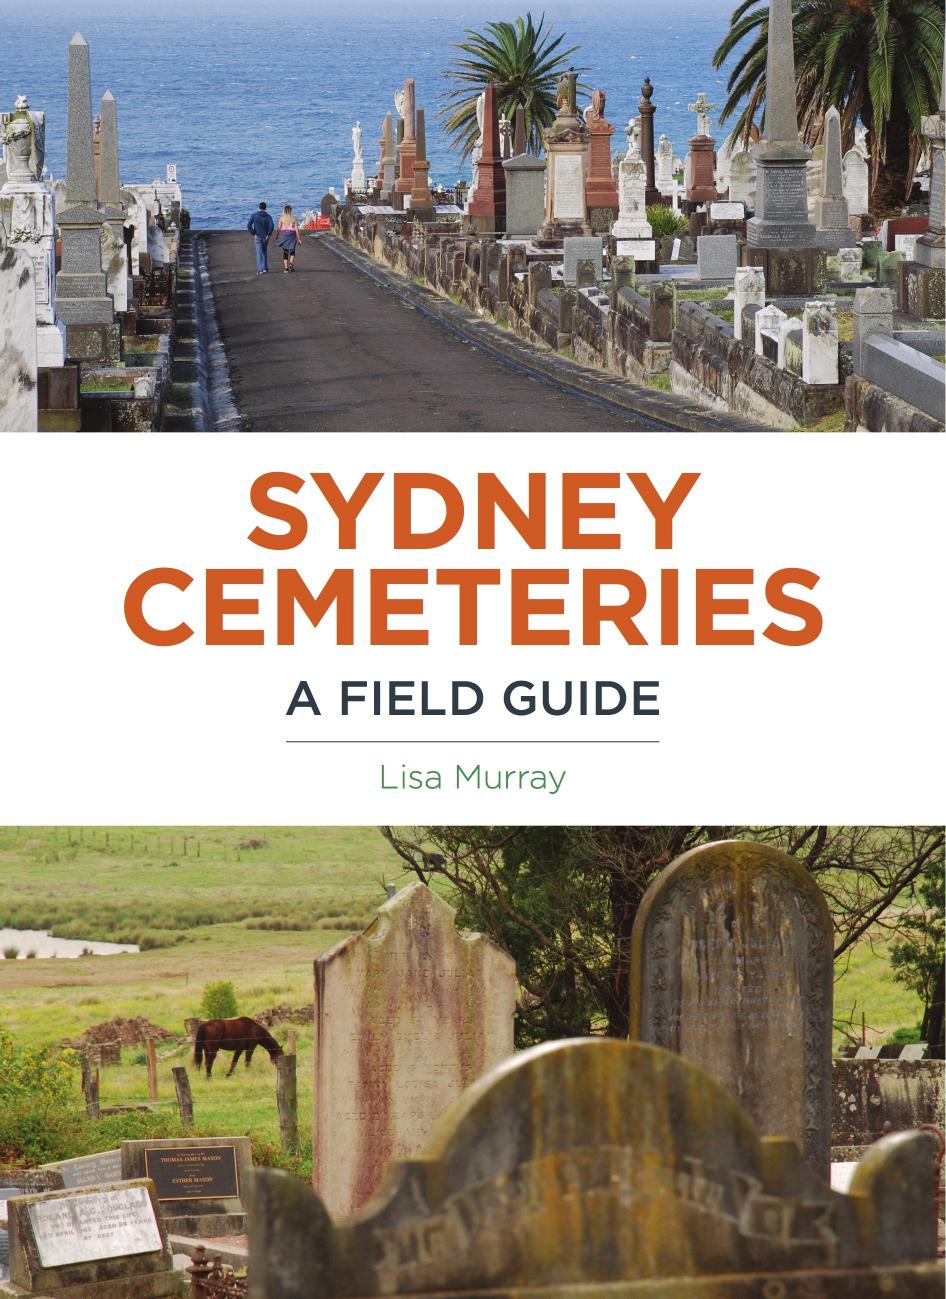 Sydney Cemeteries: A Field Guide by Lisa Murray